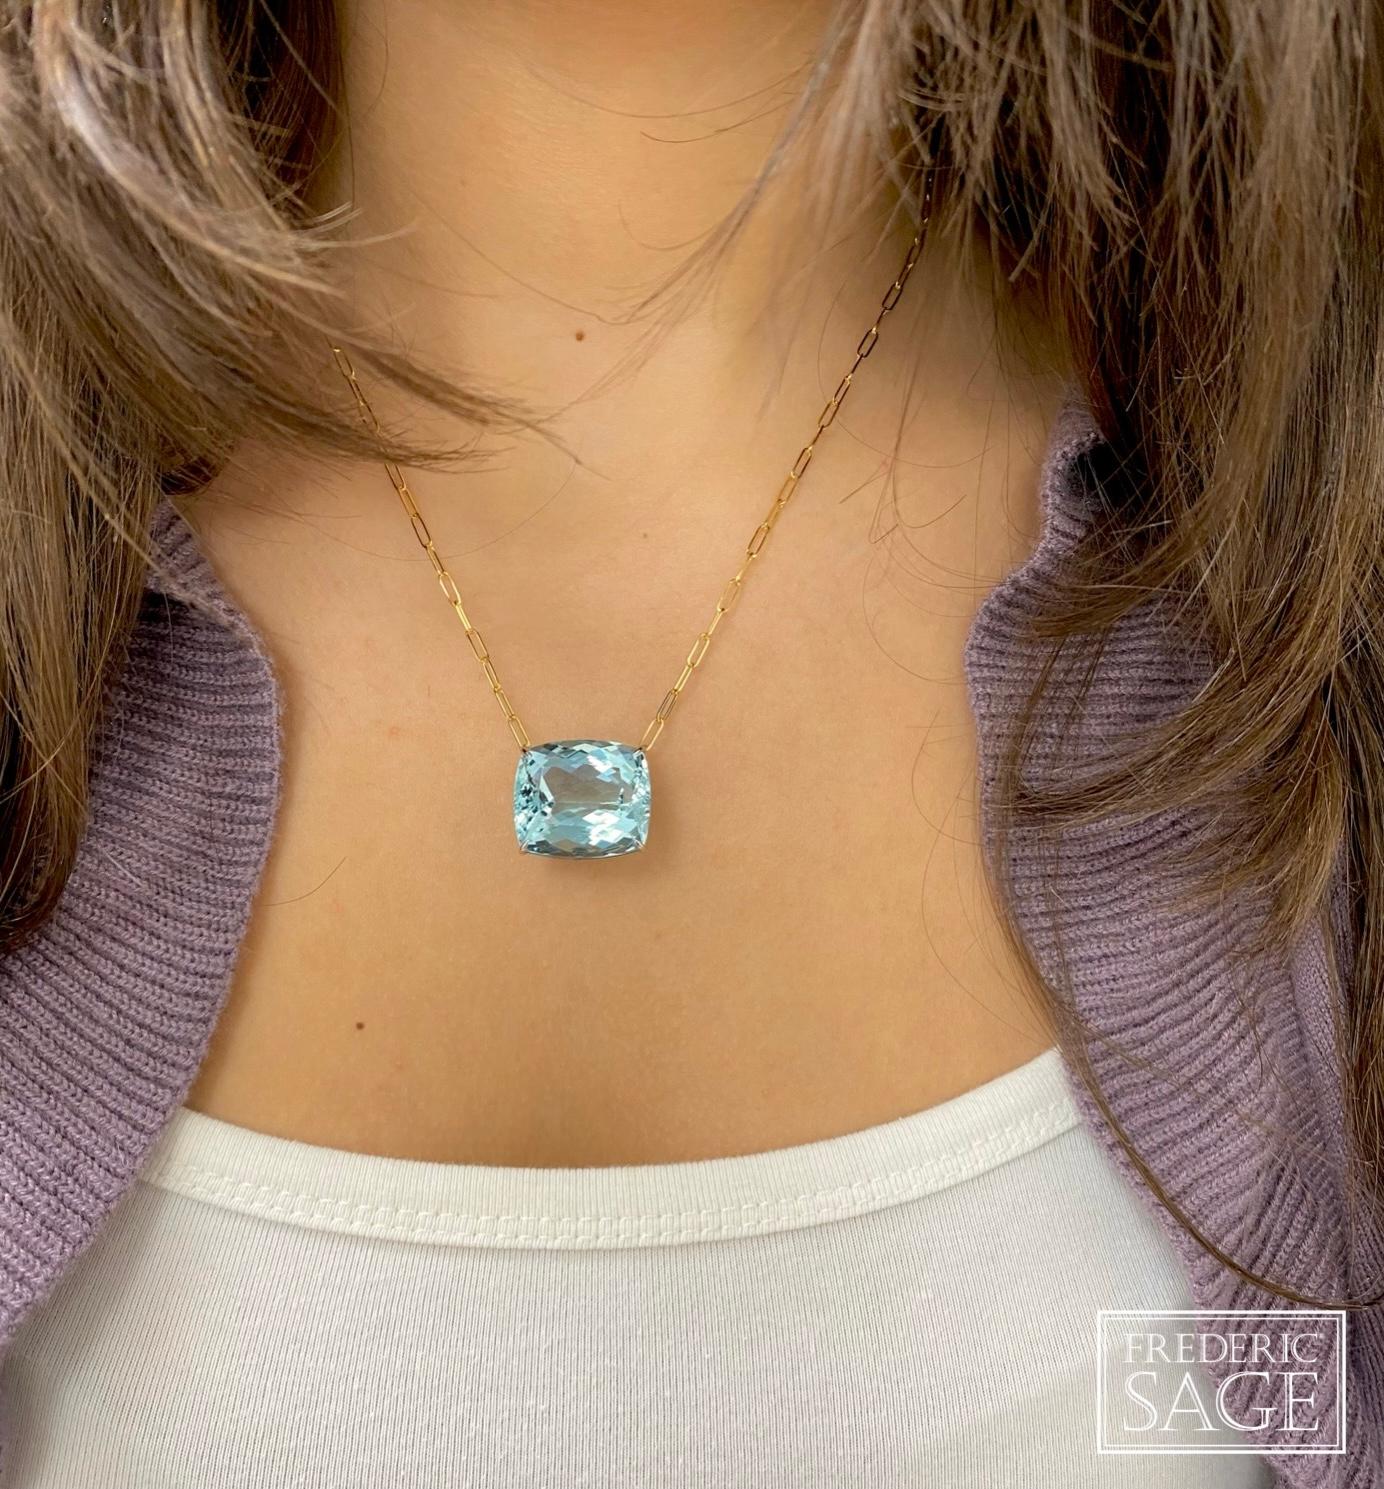 18K Yellow & White Gold Oak CU Sea Foam Blue Topaz Pendant With Attatched Yellow Gold Paperclip Chain, Aquamarine 27.20 CT
approx 21mm x 18mm

Available in other metal/ gemstone options: These Gemstone pieces can be made in white, pink, yellow gold